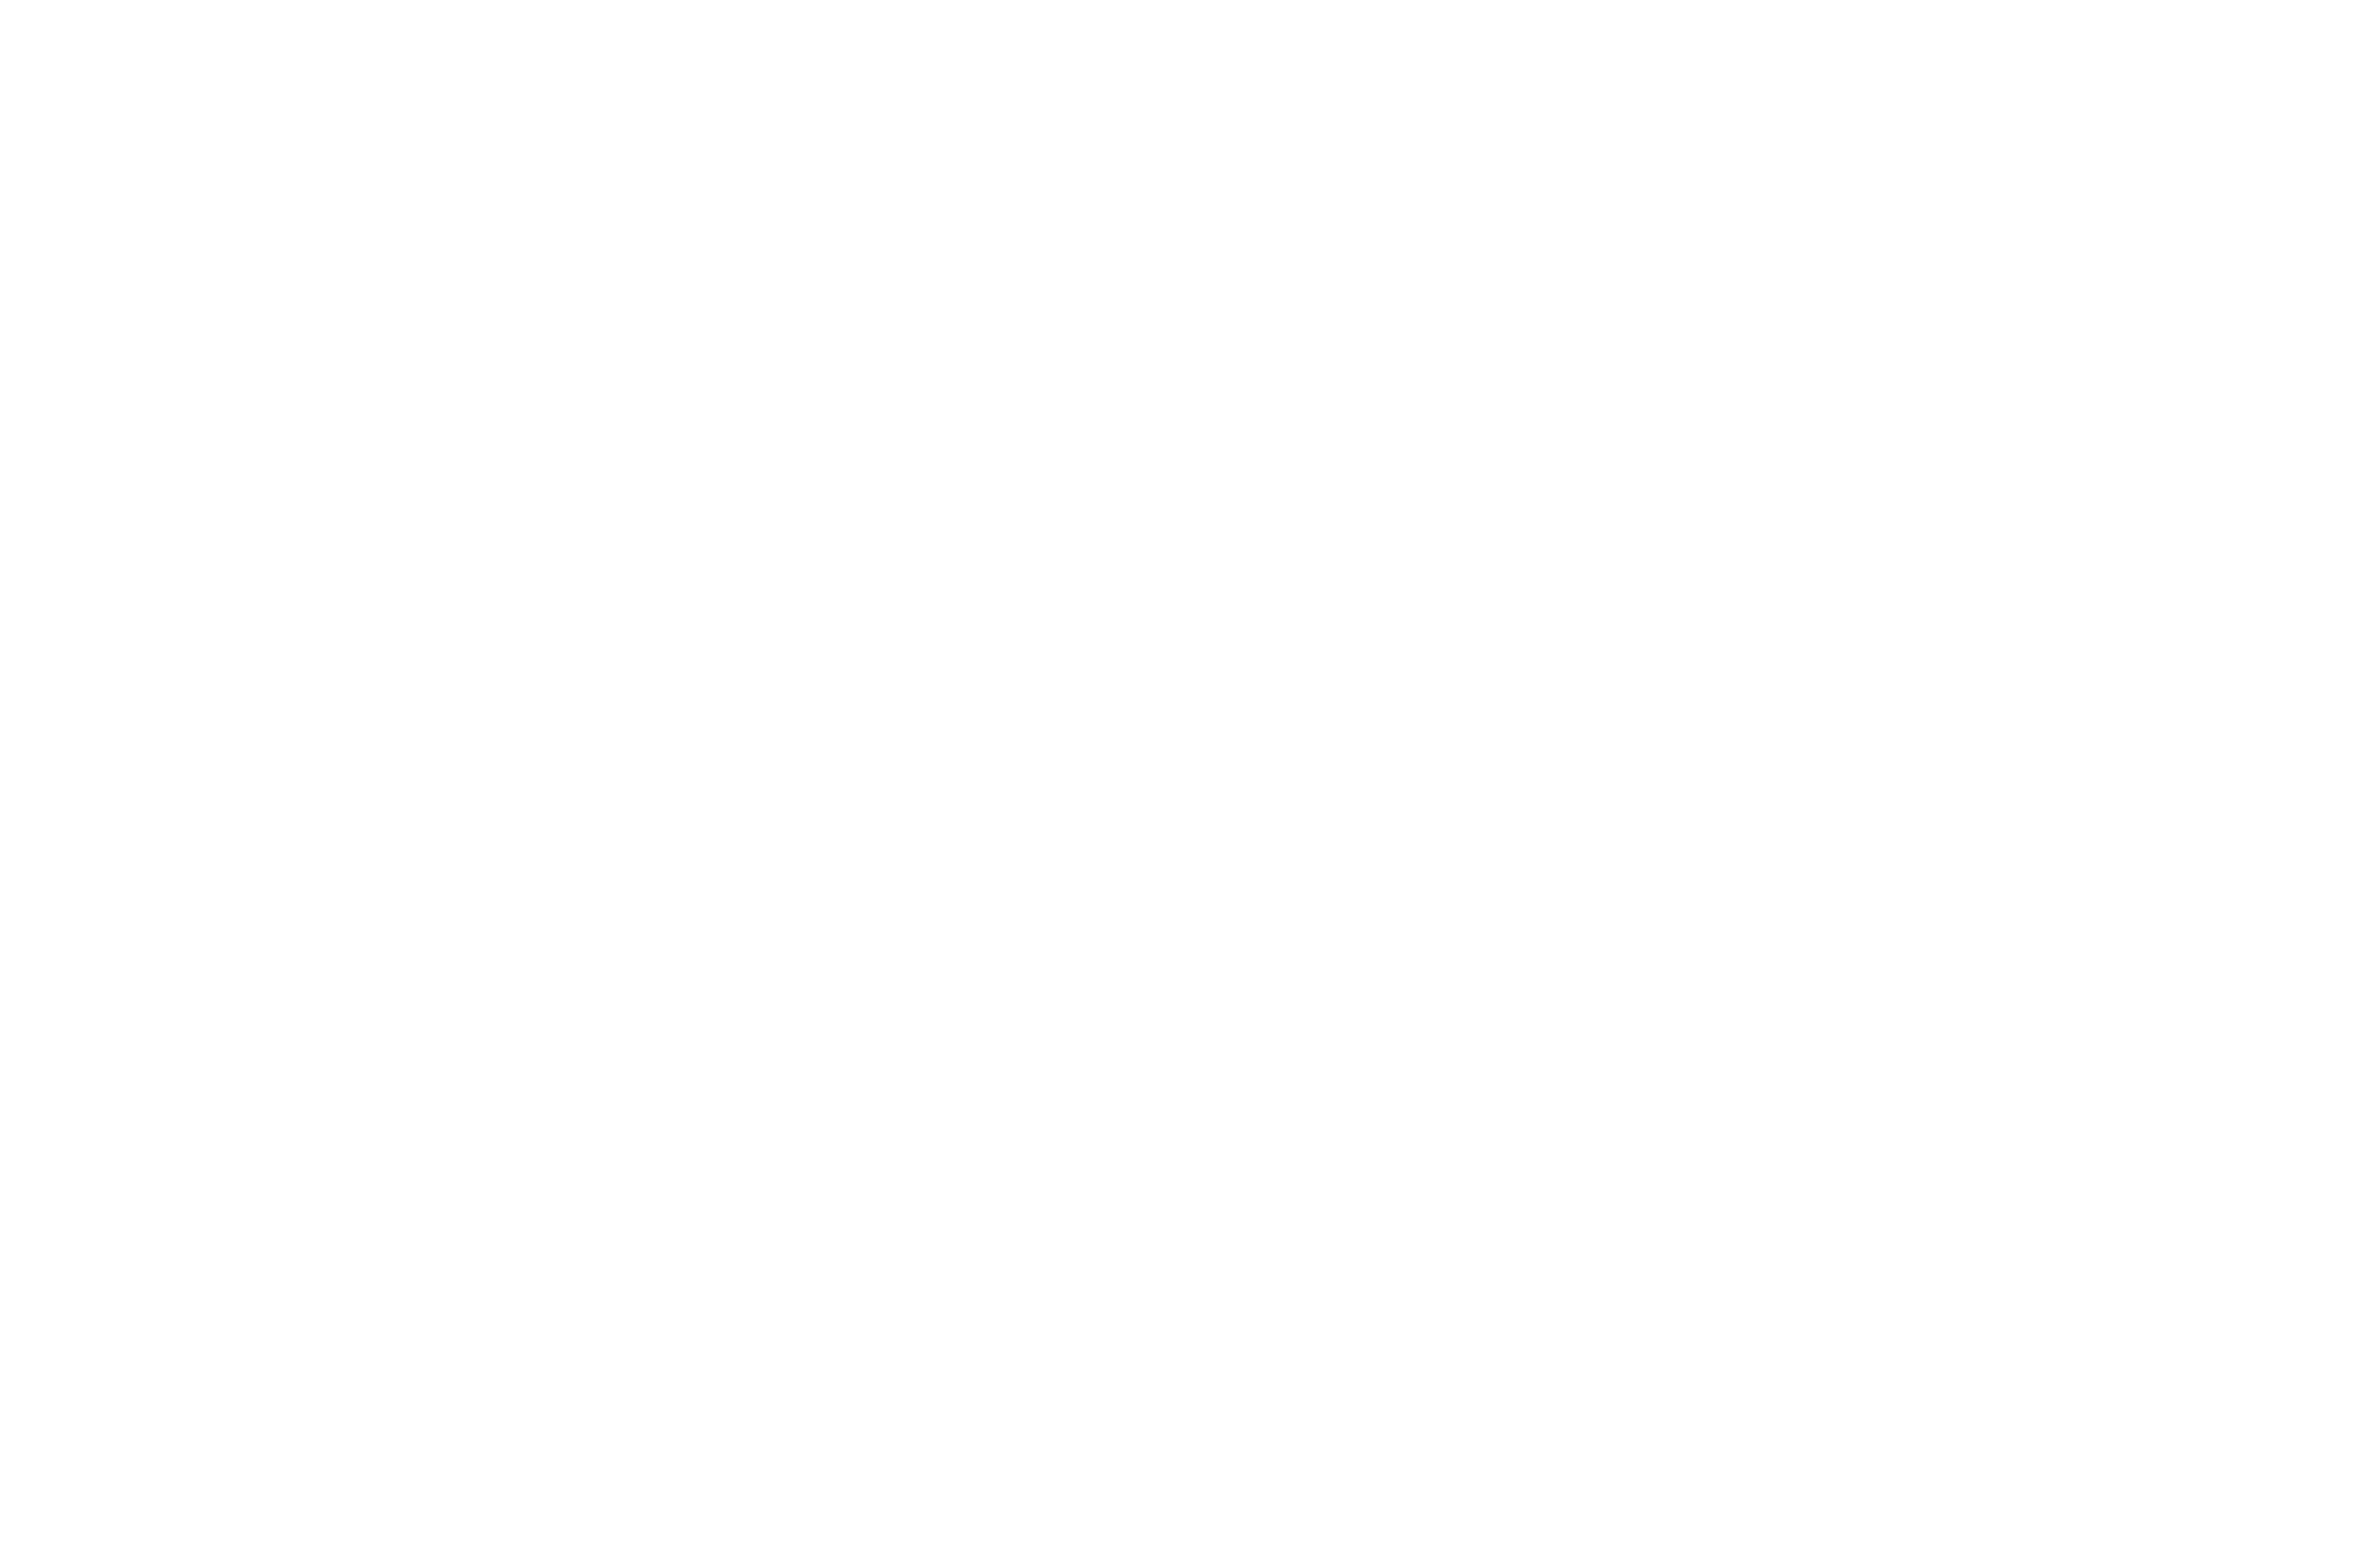 OFFICIALSELECTION GrindhouseIVZoetrope Aug2019